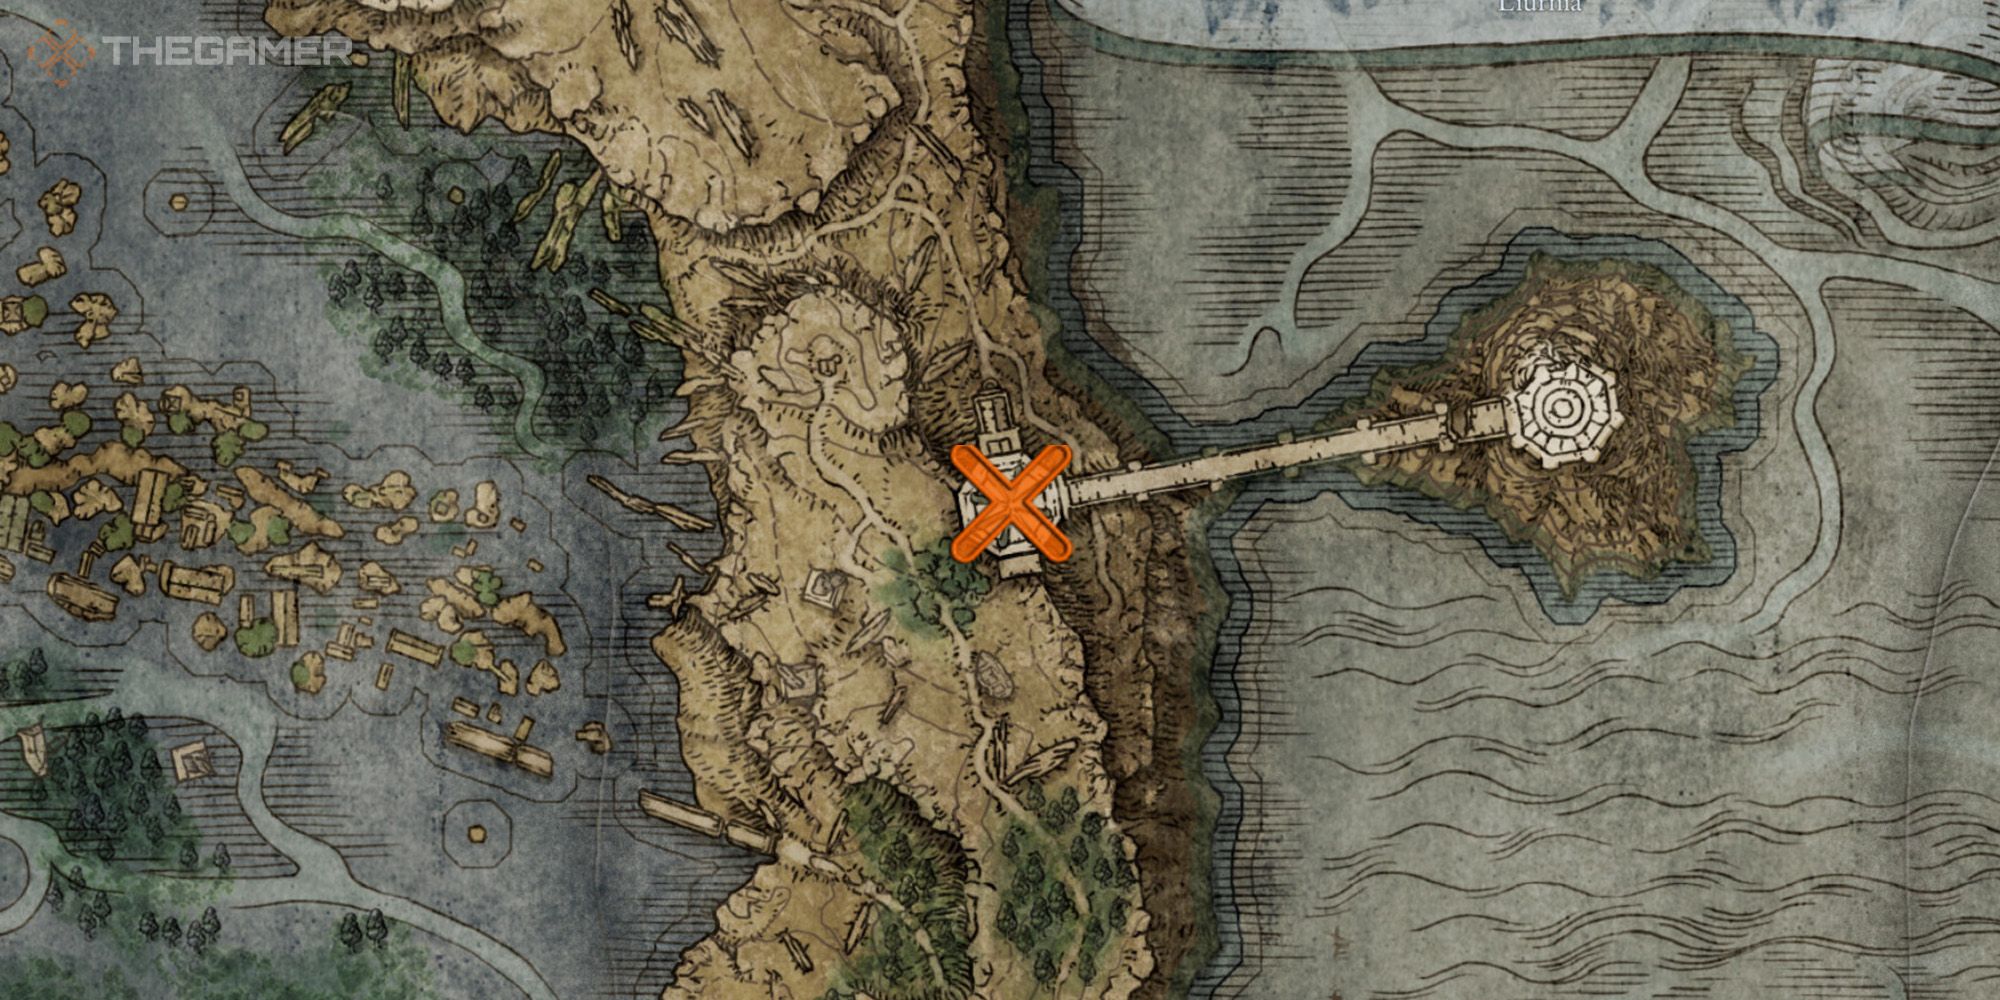 Map showing the location of Preceptor Miriam within Liurna in Elden Ring